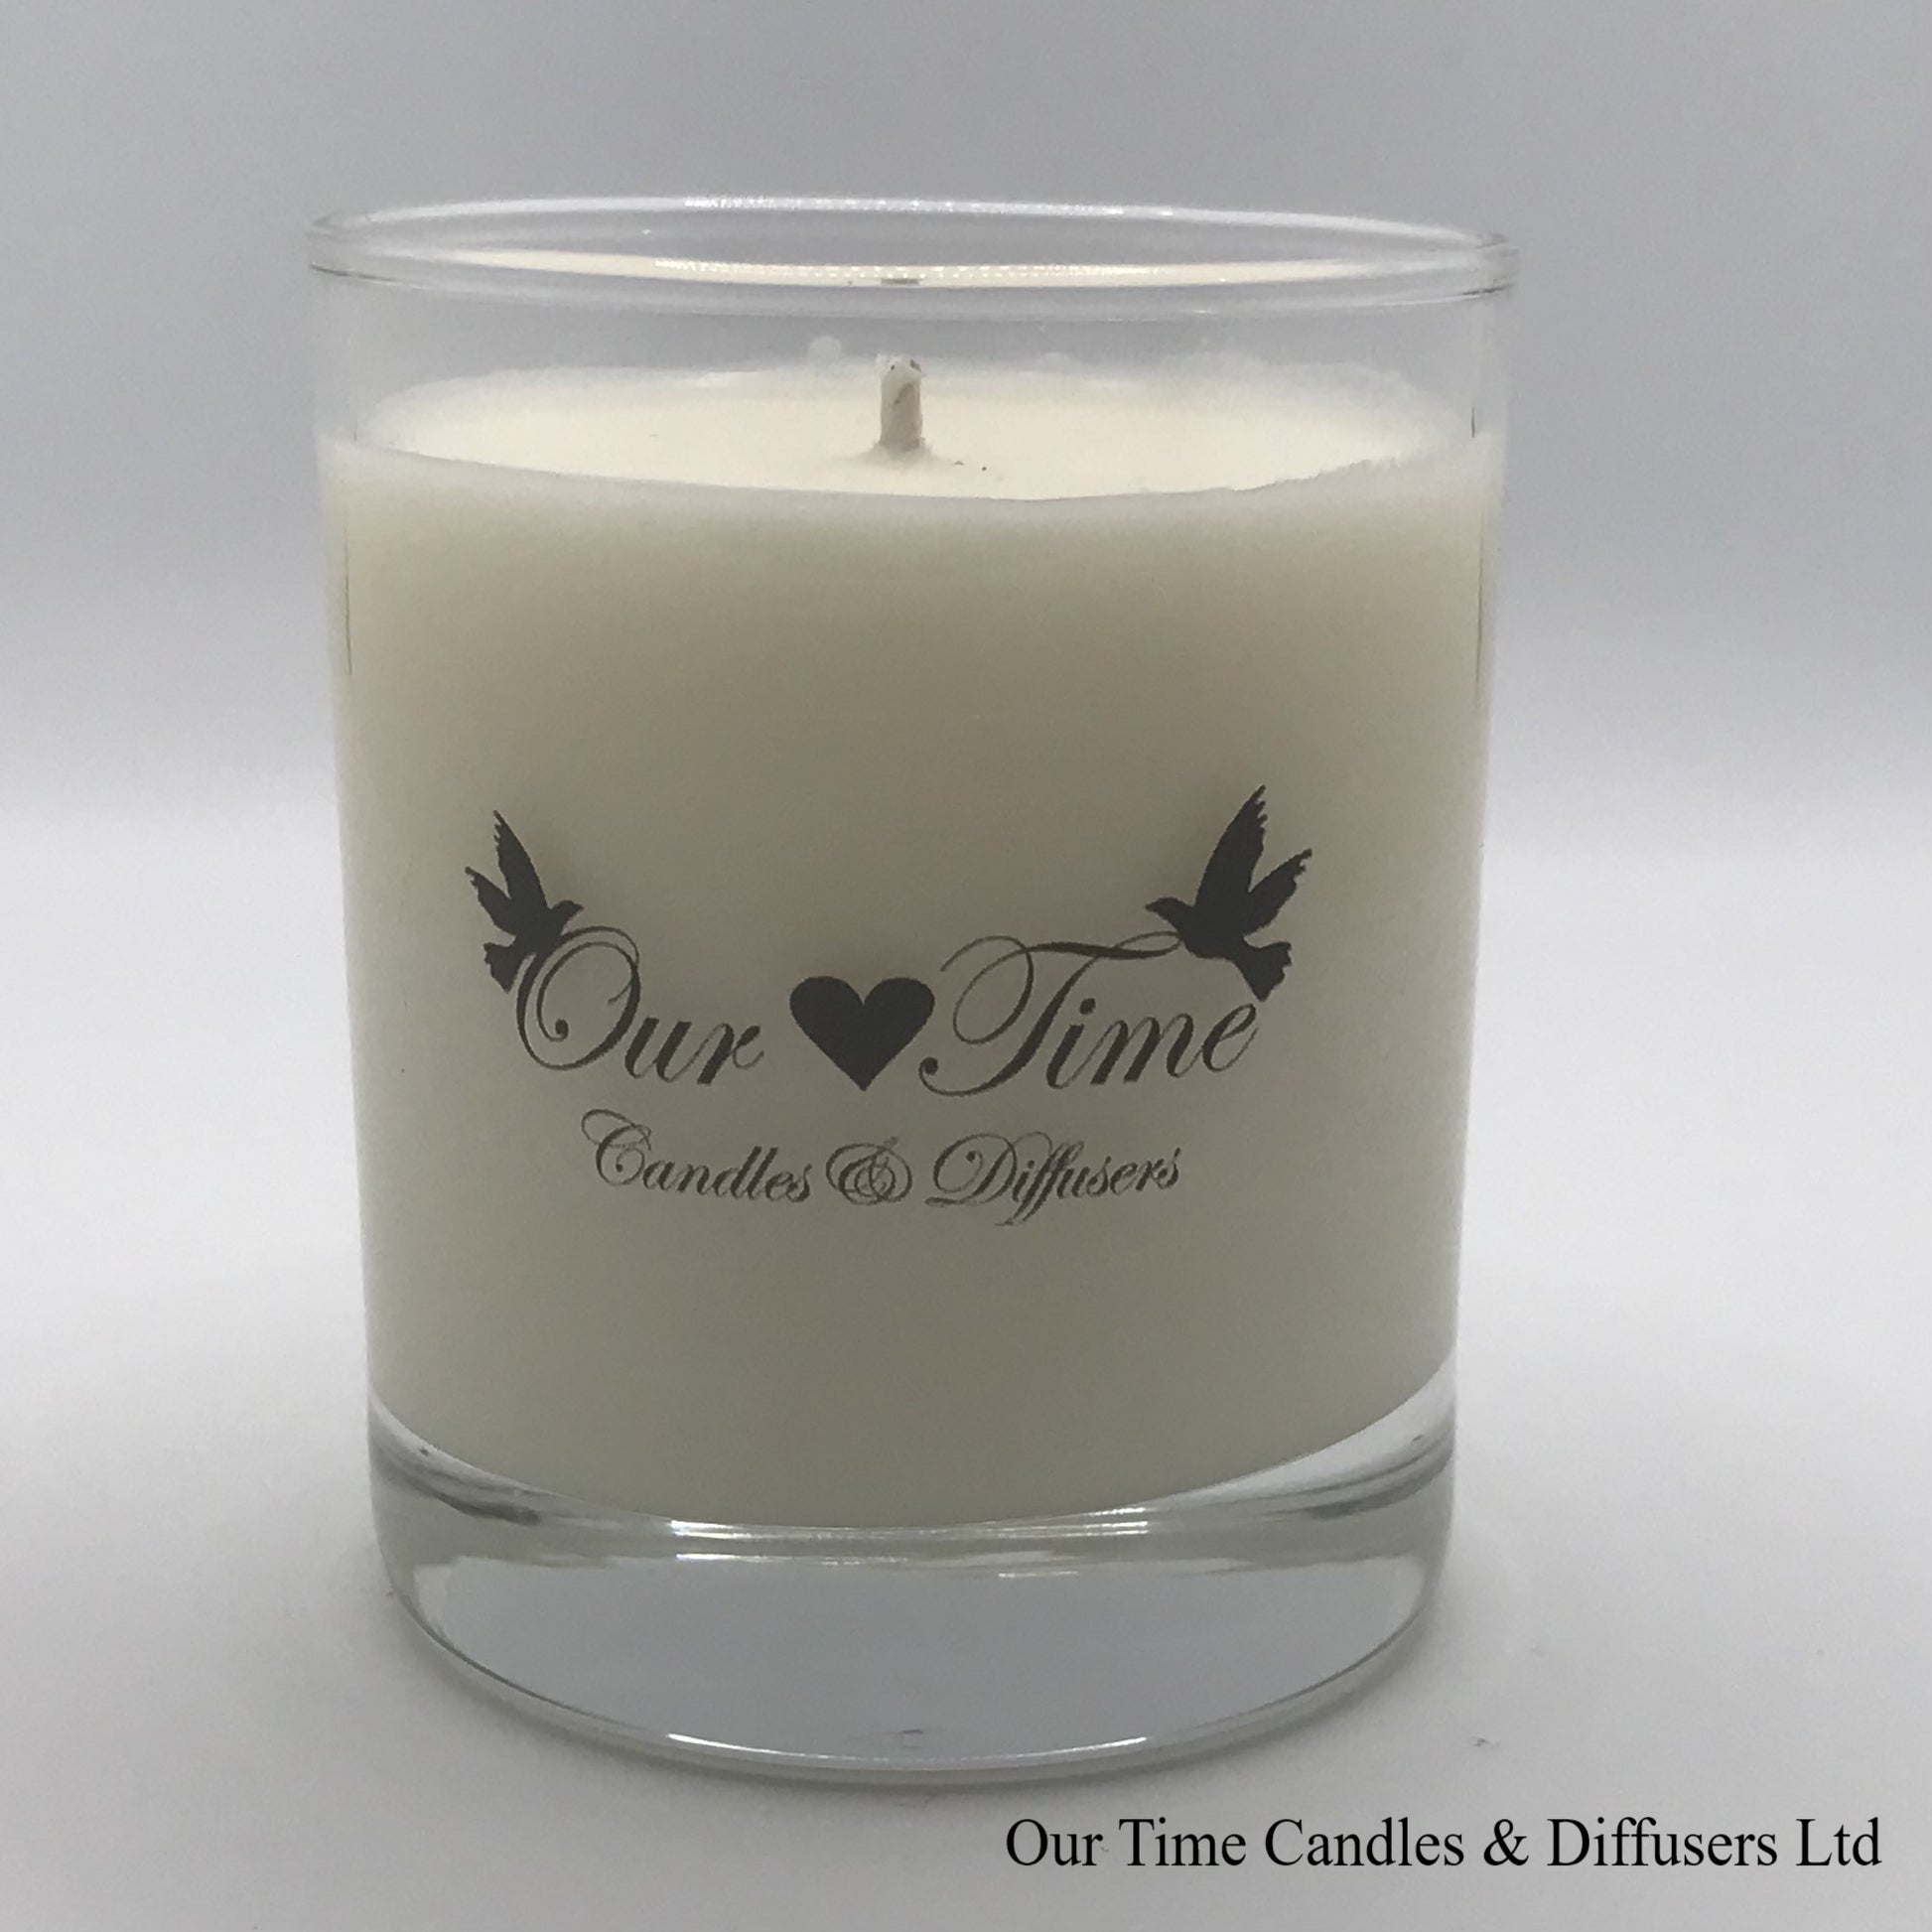 Walks in the Sun scented wax filled soy candle medium